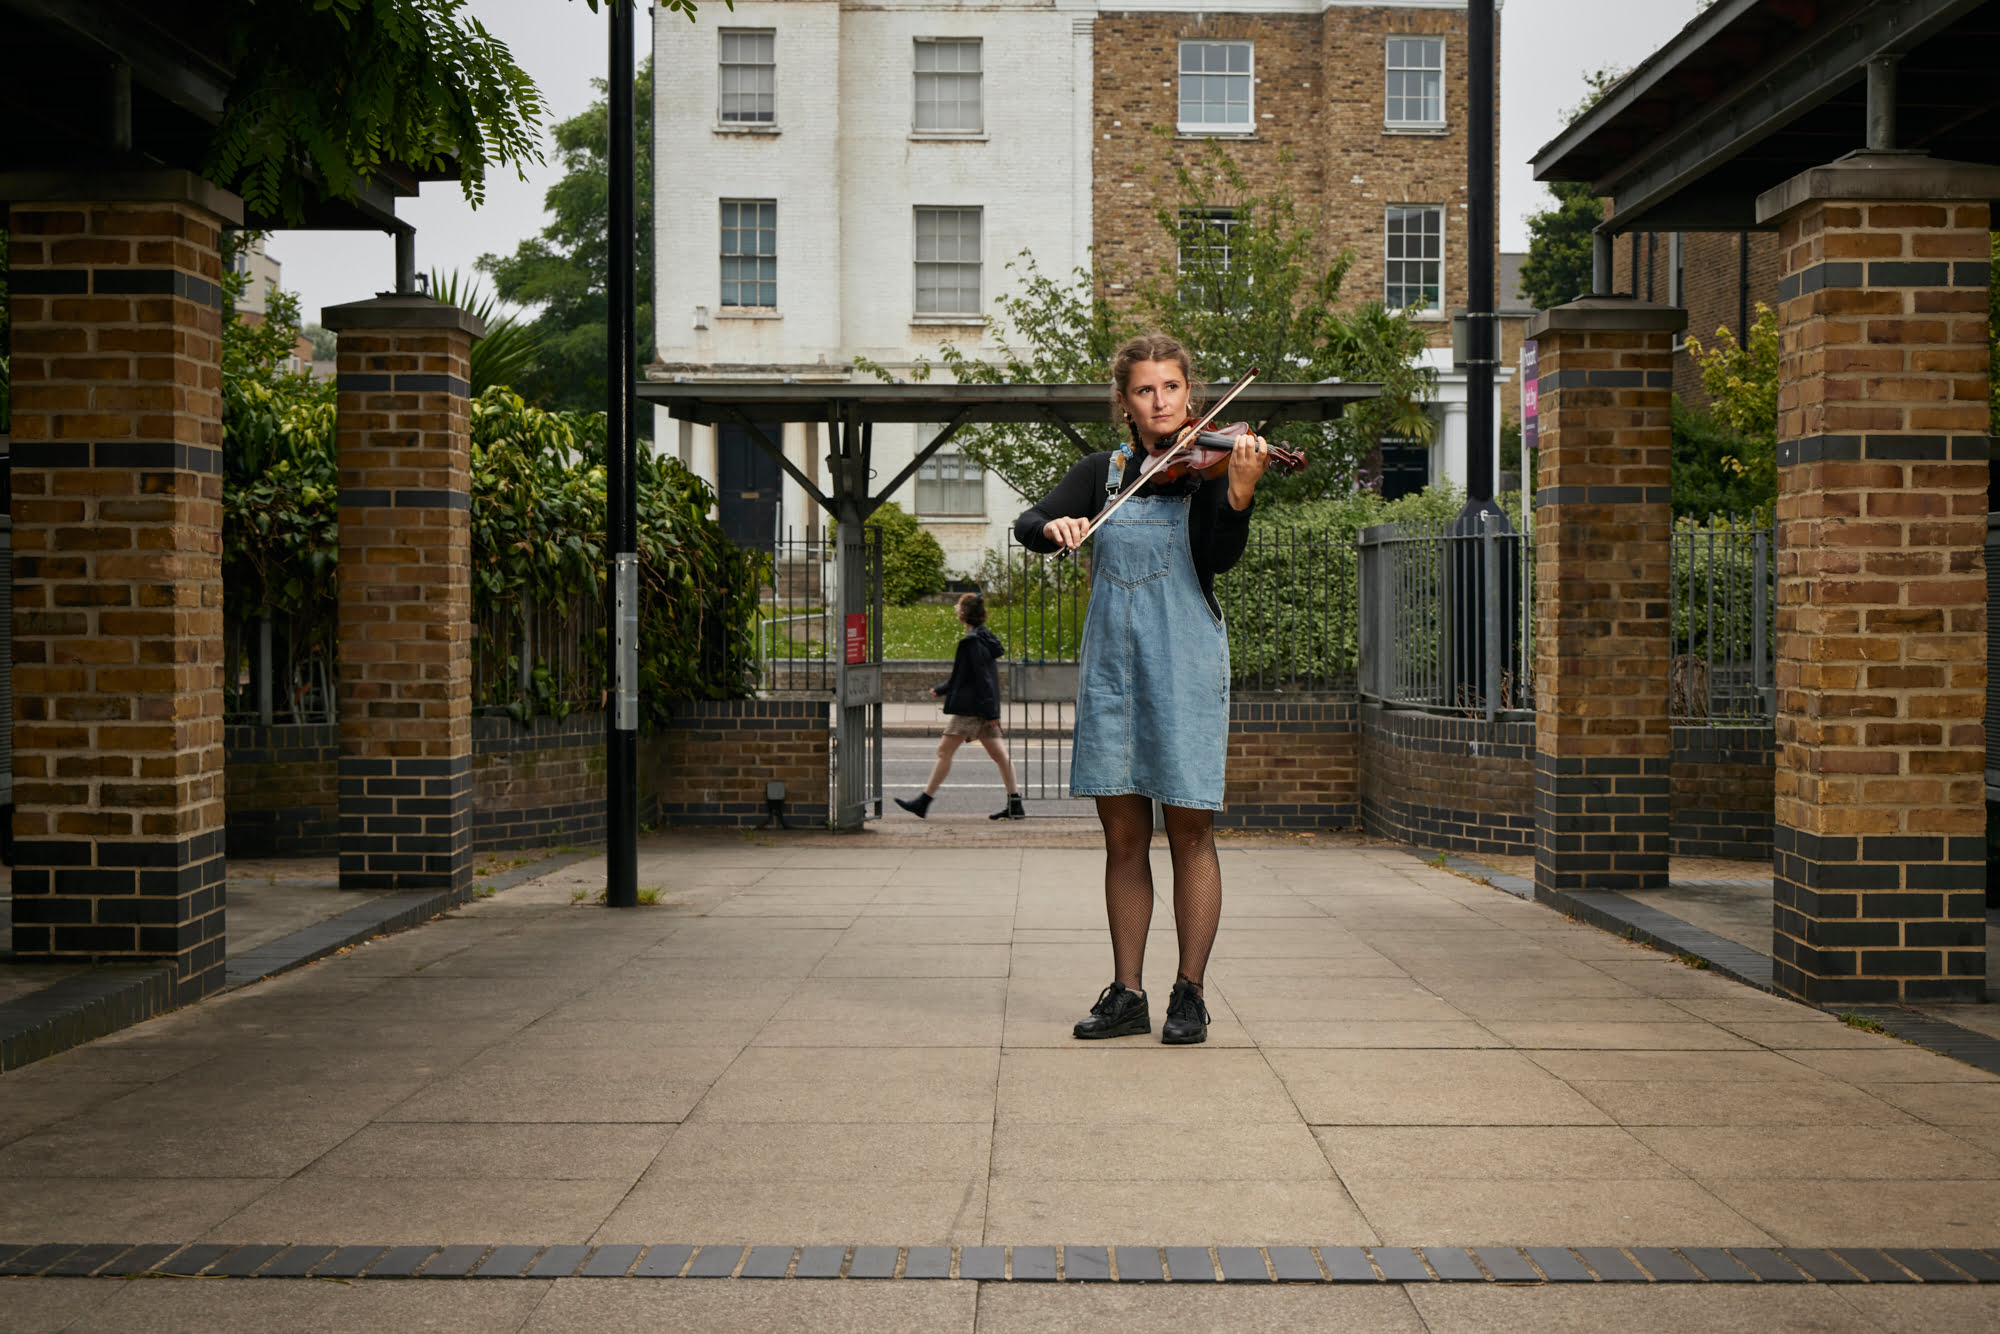 Ana Vandepeer, Angell Town Estate, looking onto Brixton Road. Principal violinist of Brixton Chamber Orchestra, pictured here at Leys Court, North Brixton, looking on to Brixton Road, ahead of a Summer Estates performance. The development was built in close consultation with residents, to replace the formidable and fortress-like 1970s Angell Town concrete block estate which taxi drivers often refused to enter. Open, light and close to the road while centered around communal spaces, Leys offers a very different living experience tailored by and for residents.